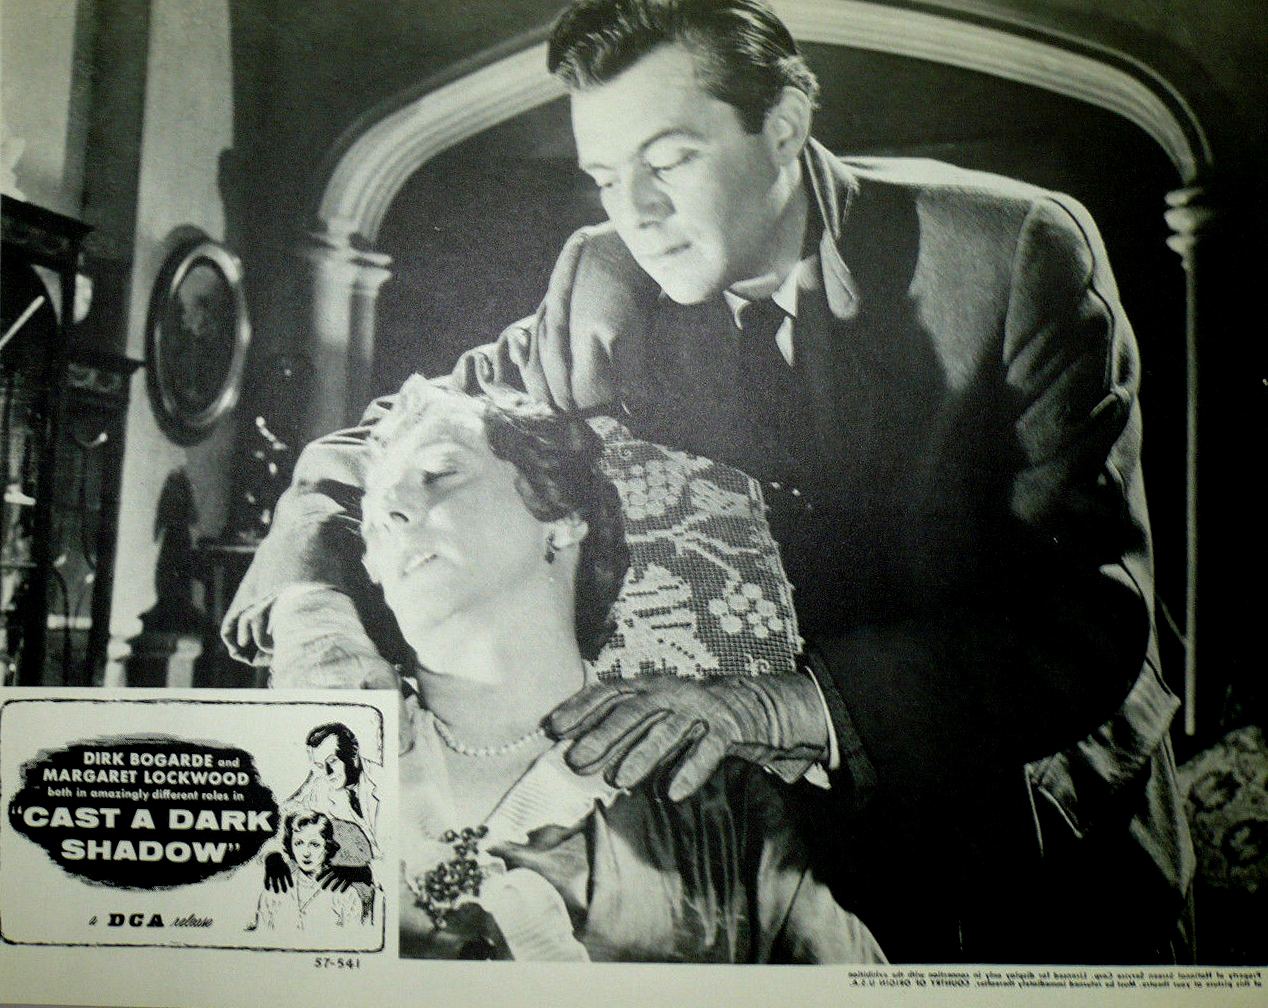 Lobby card from Cast a Dark Shadow (1955) (2) featuring Dirk Bogarde and Mona Washbourne